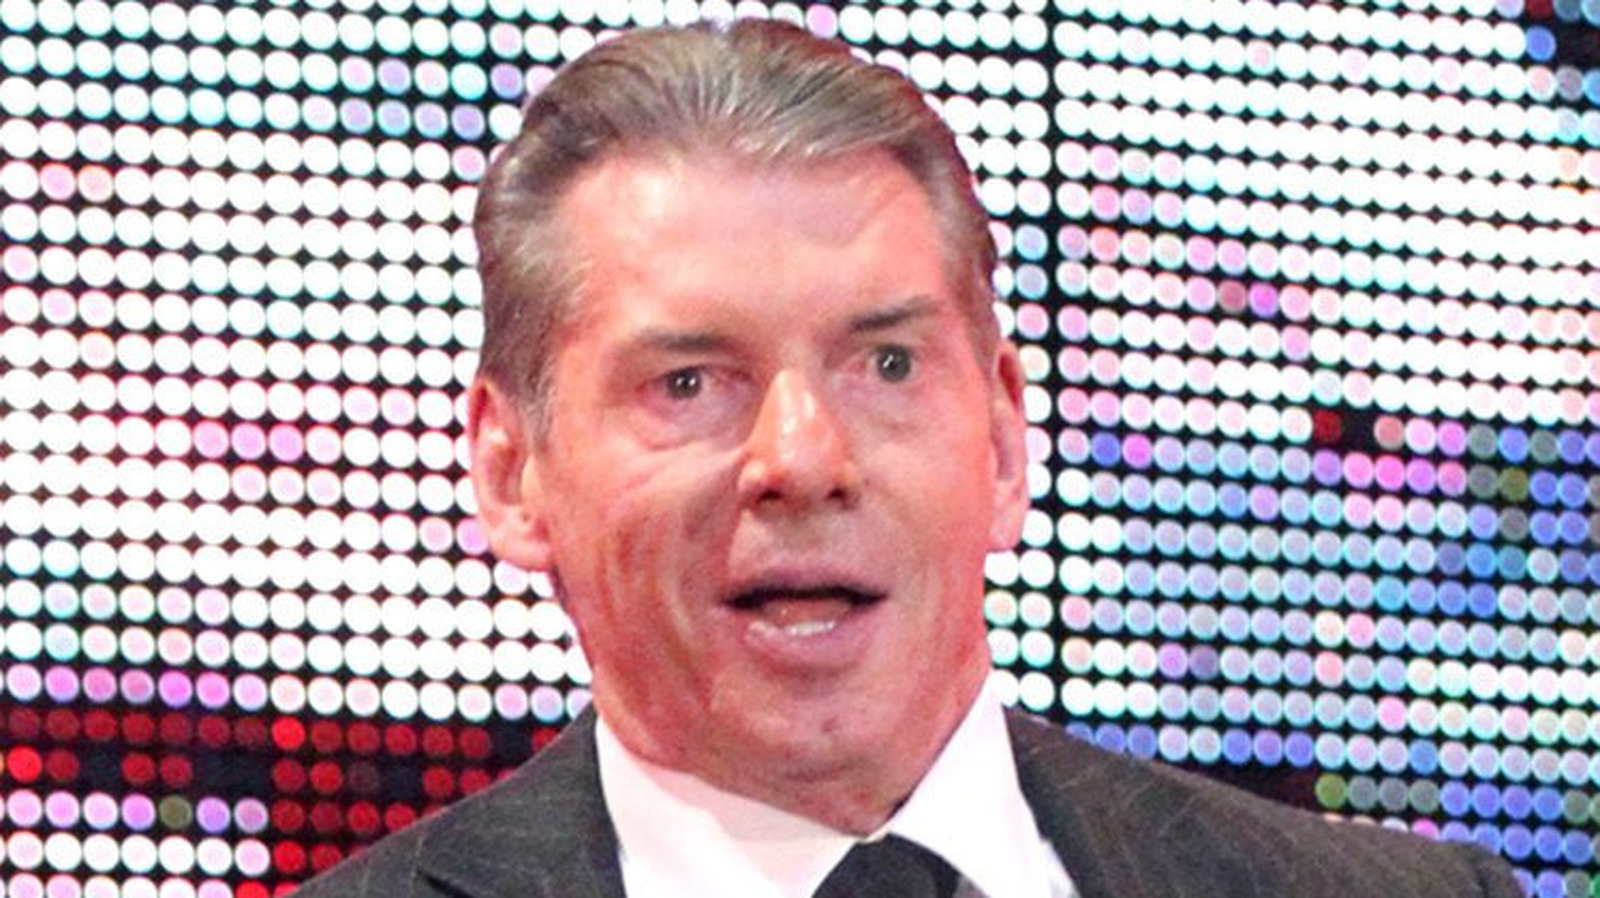 WWE Enters Two-Year Employment Agreement With Executive Chairman Vince McMahon